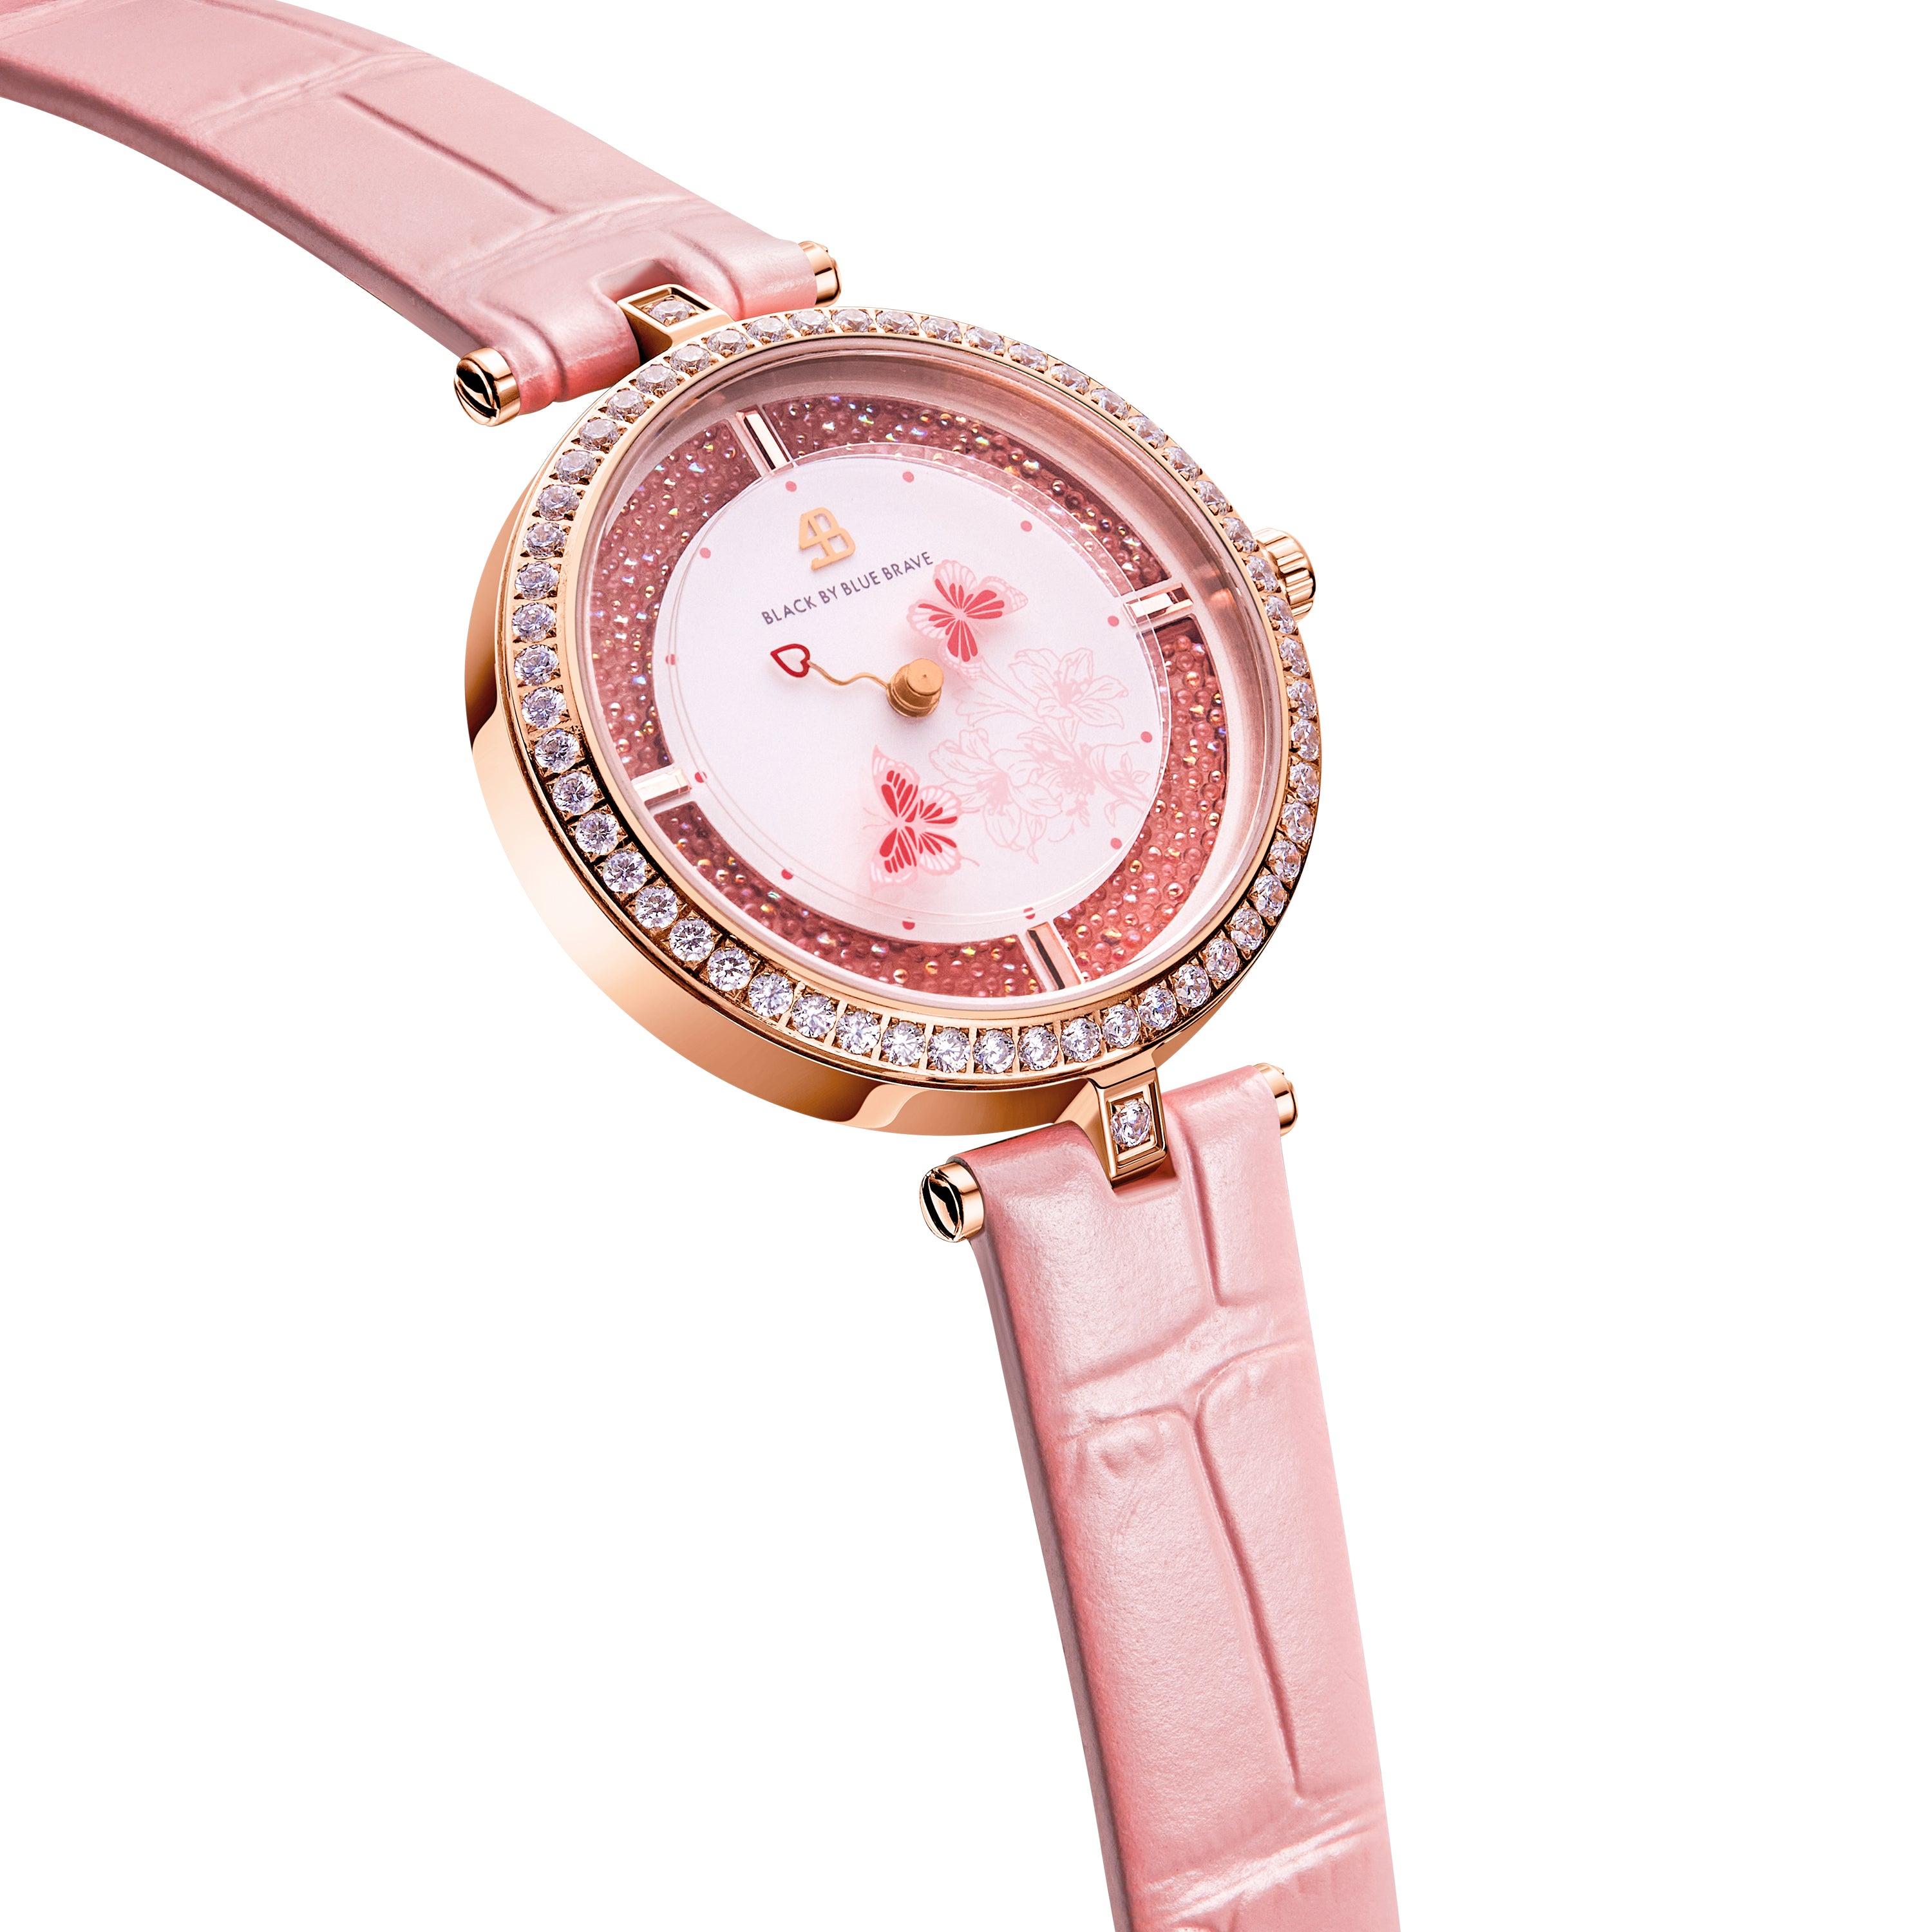 (34mm) Pink Butterfly Lovers Watch With Flower Ceramic Jewelleries（Earrings & Necklace）